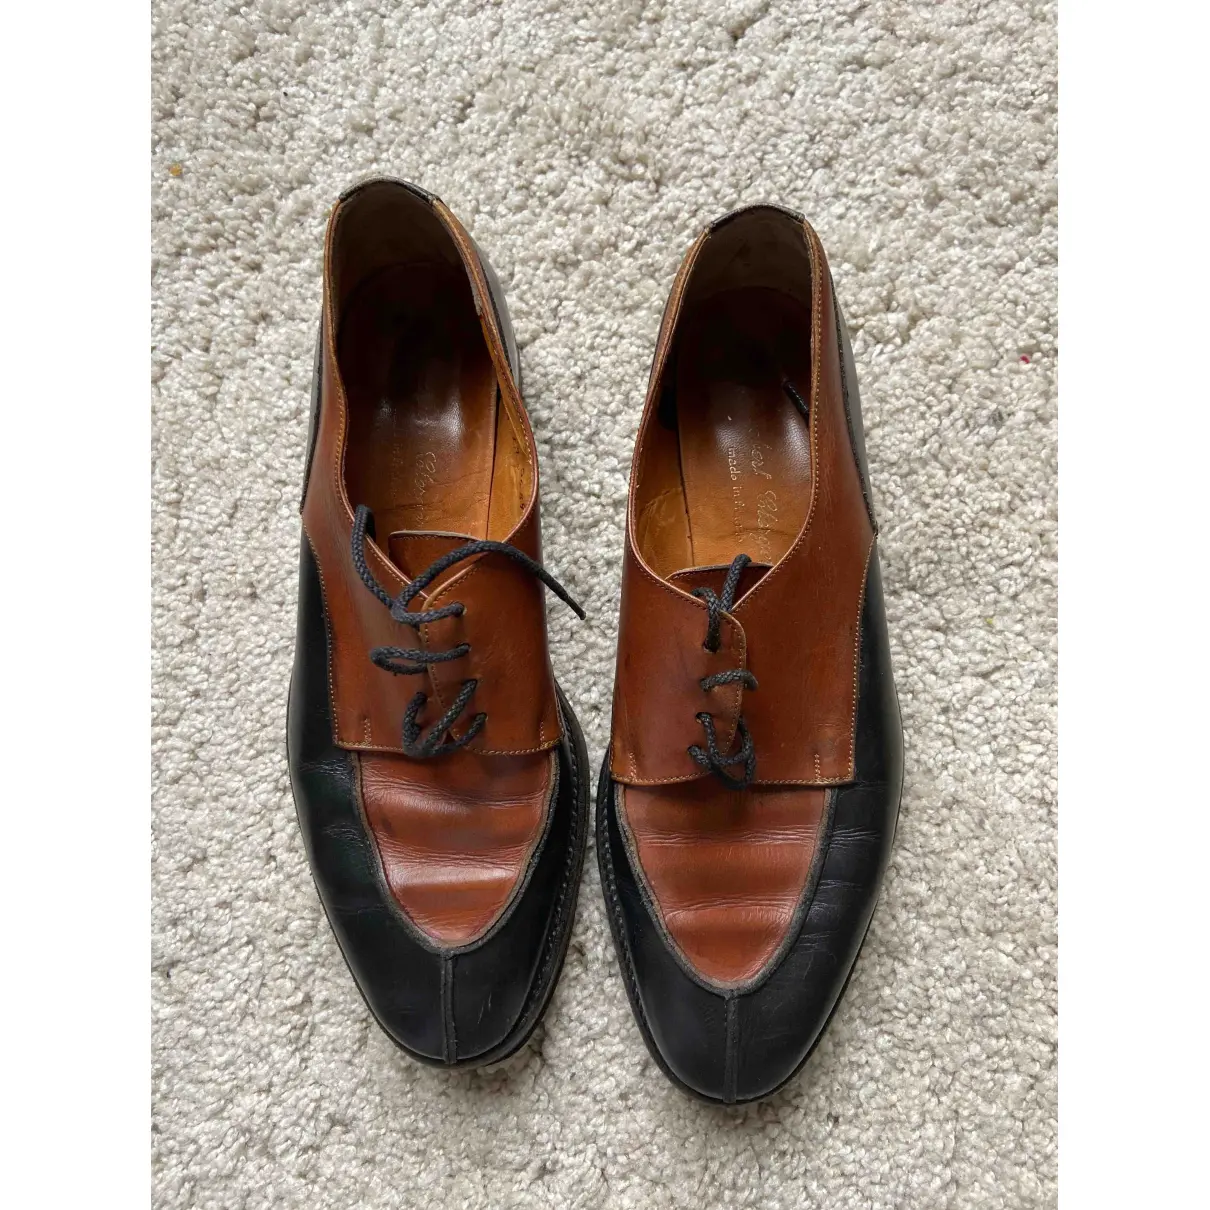 Buy Robert Clergerie Leather lace ups online - Vintage